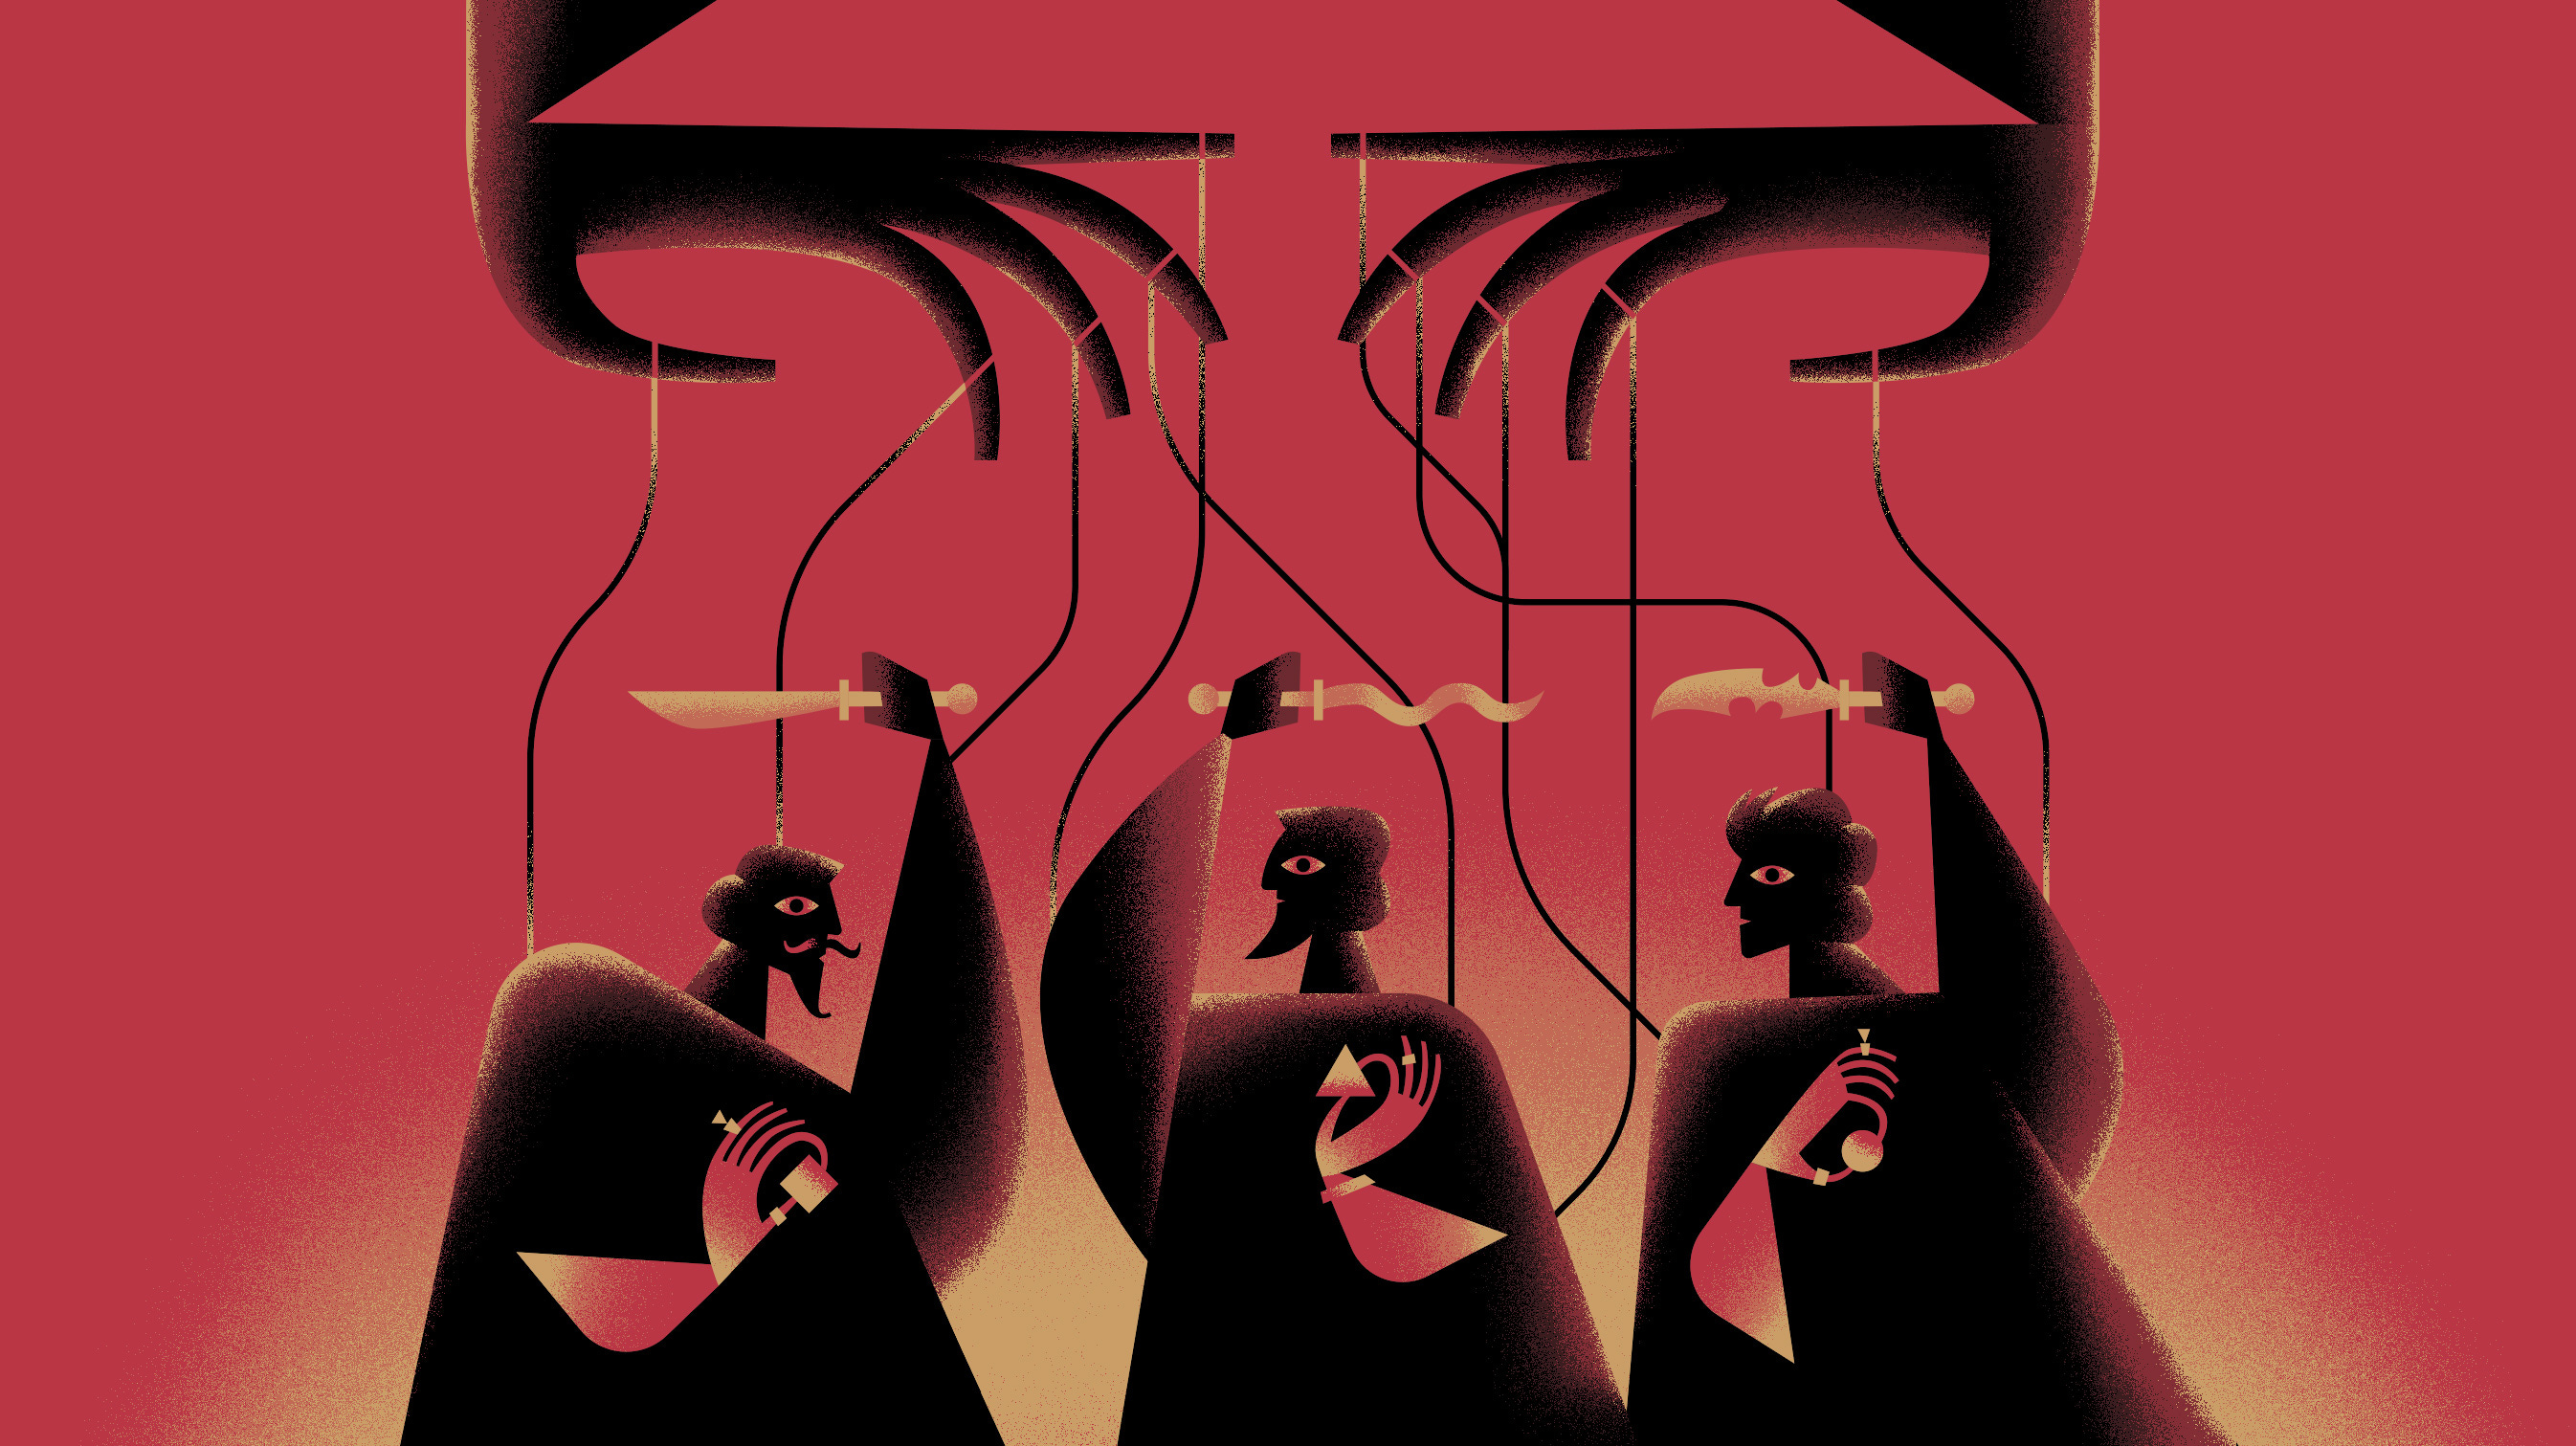 A smaller version of The Slow Knife cover art. Three silhouetted figures carouse around a table while above, a pair of looming hands hold menacing strings tied to the trio below.